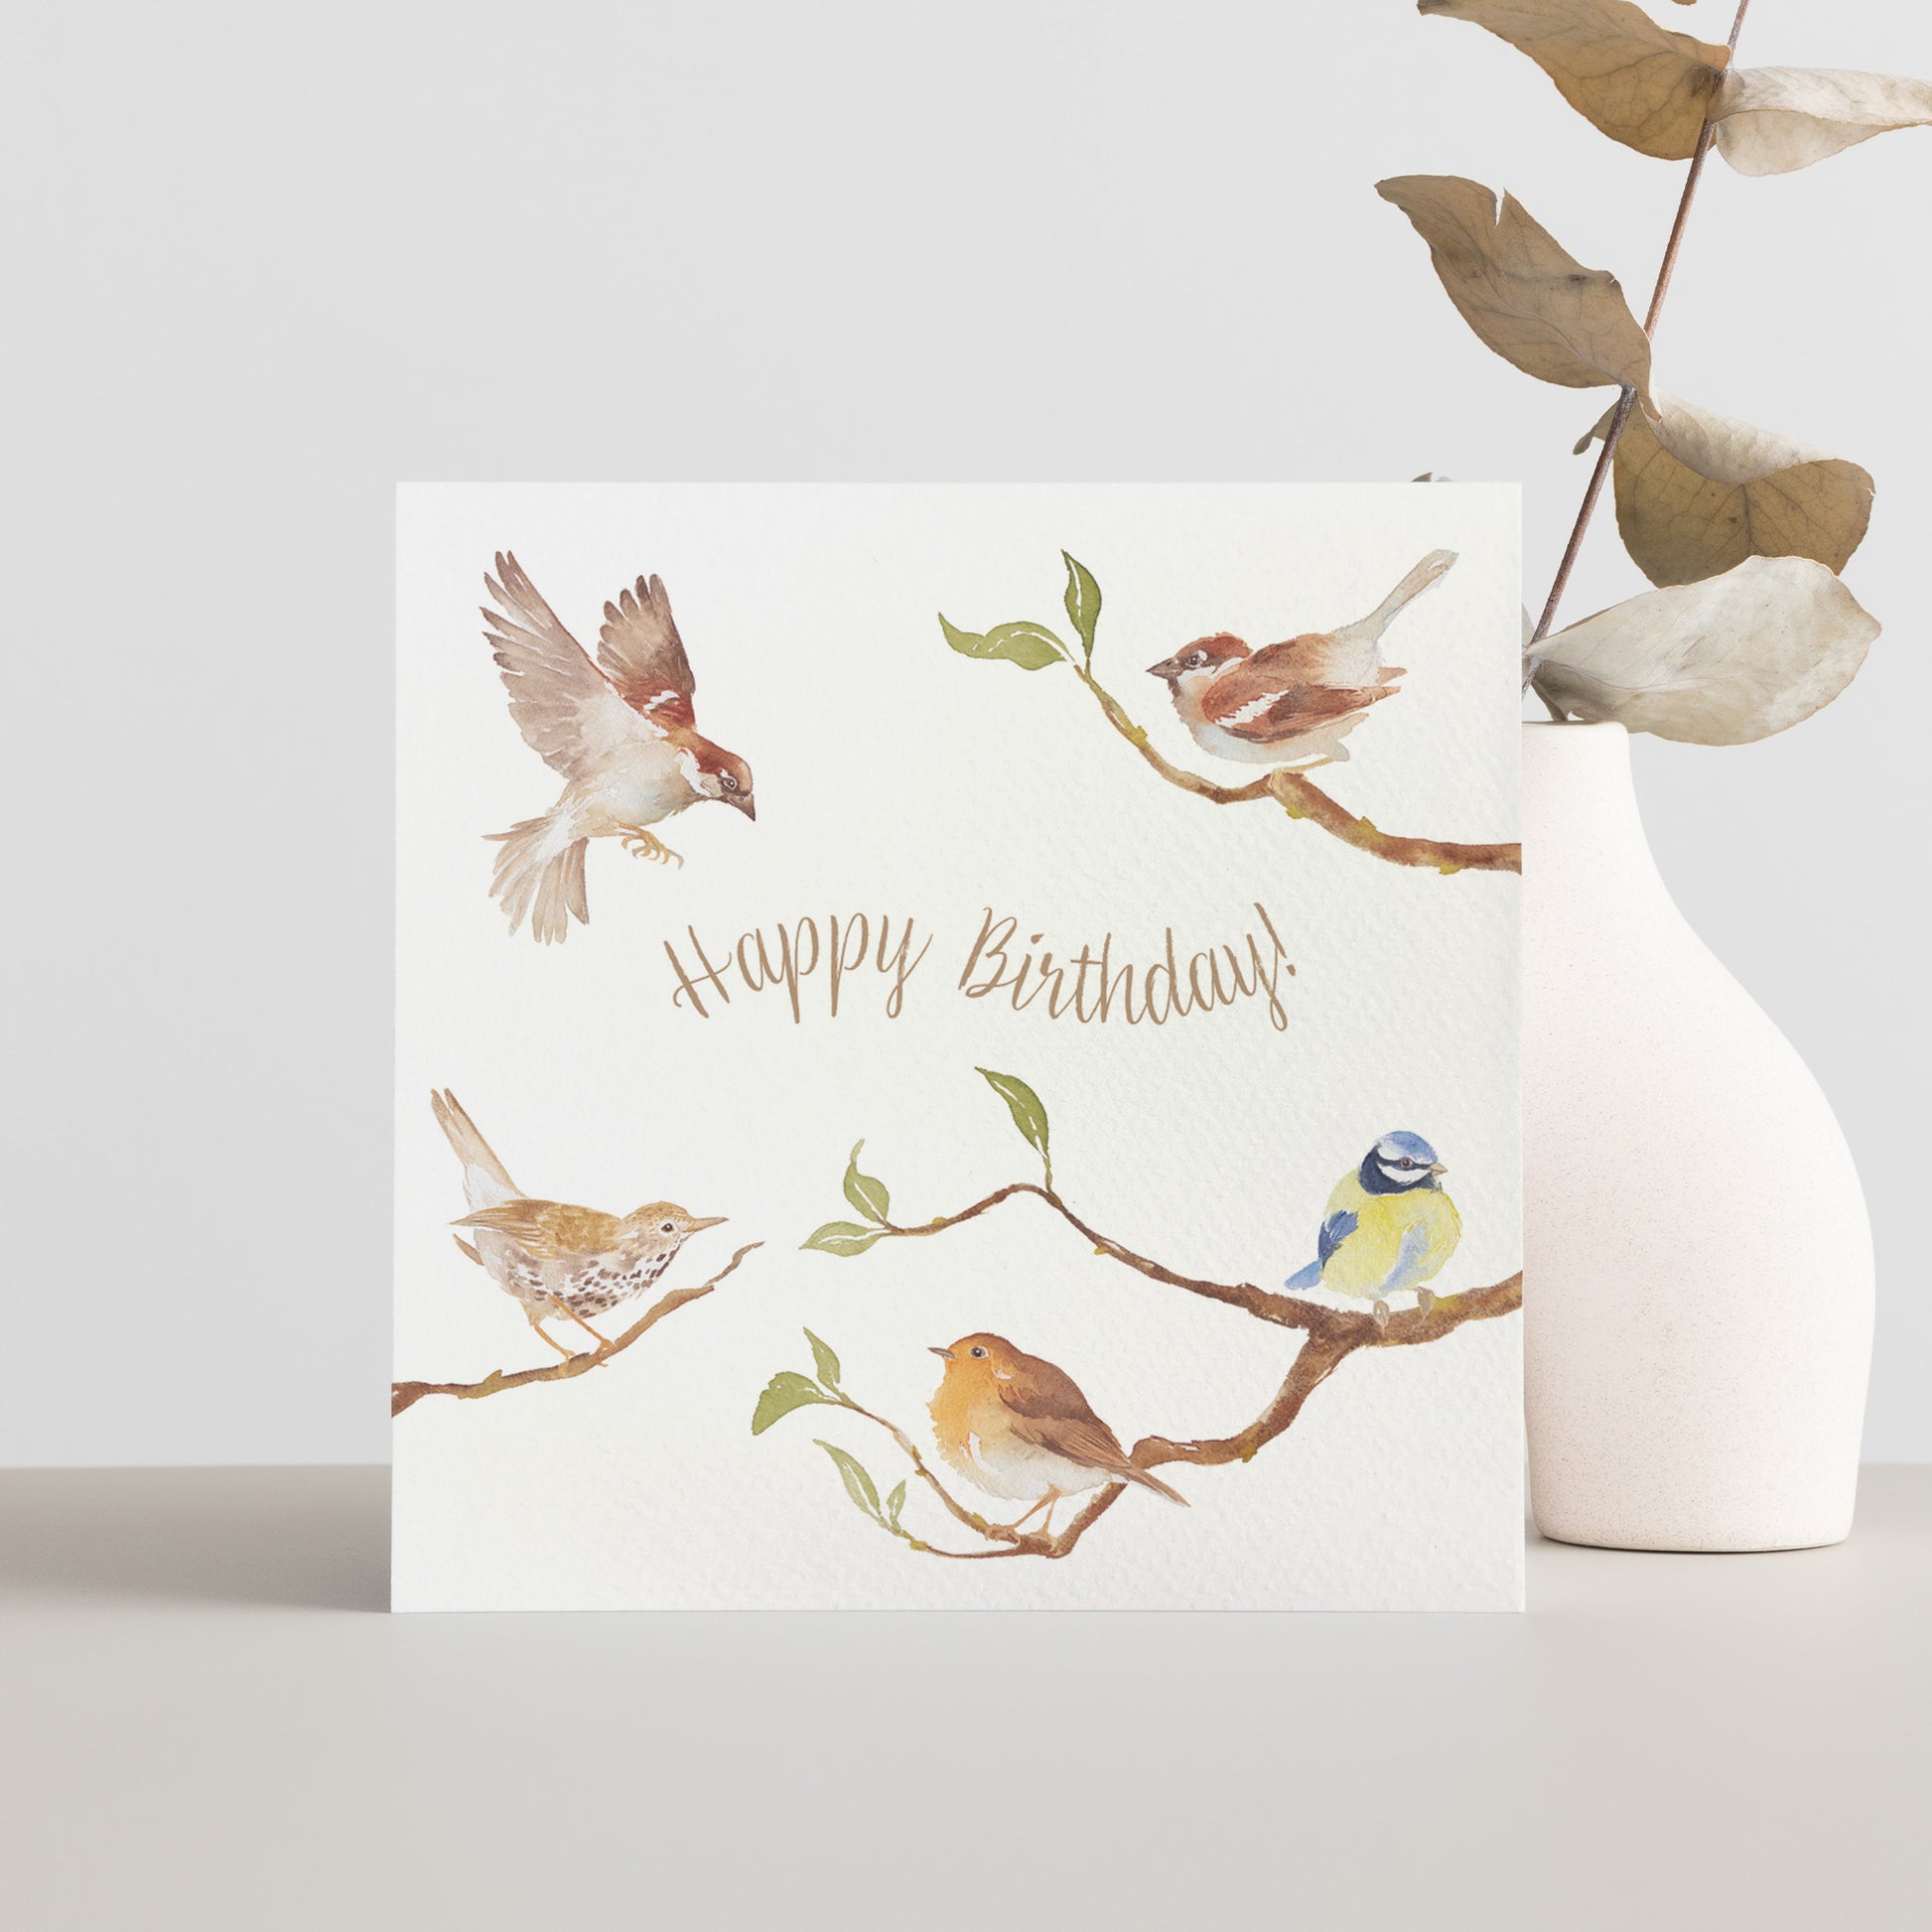 A greetings card reading Happy Birthday in brown text surrounded by garden birds on branches in a watercolour style.